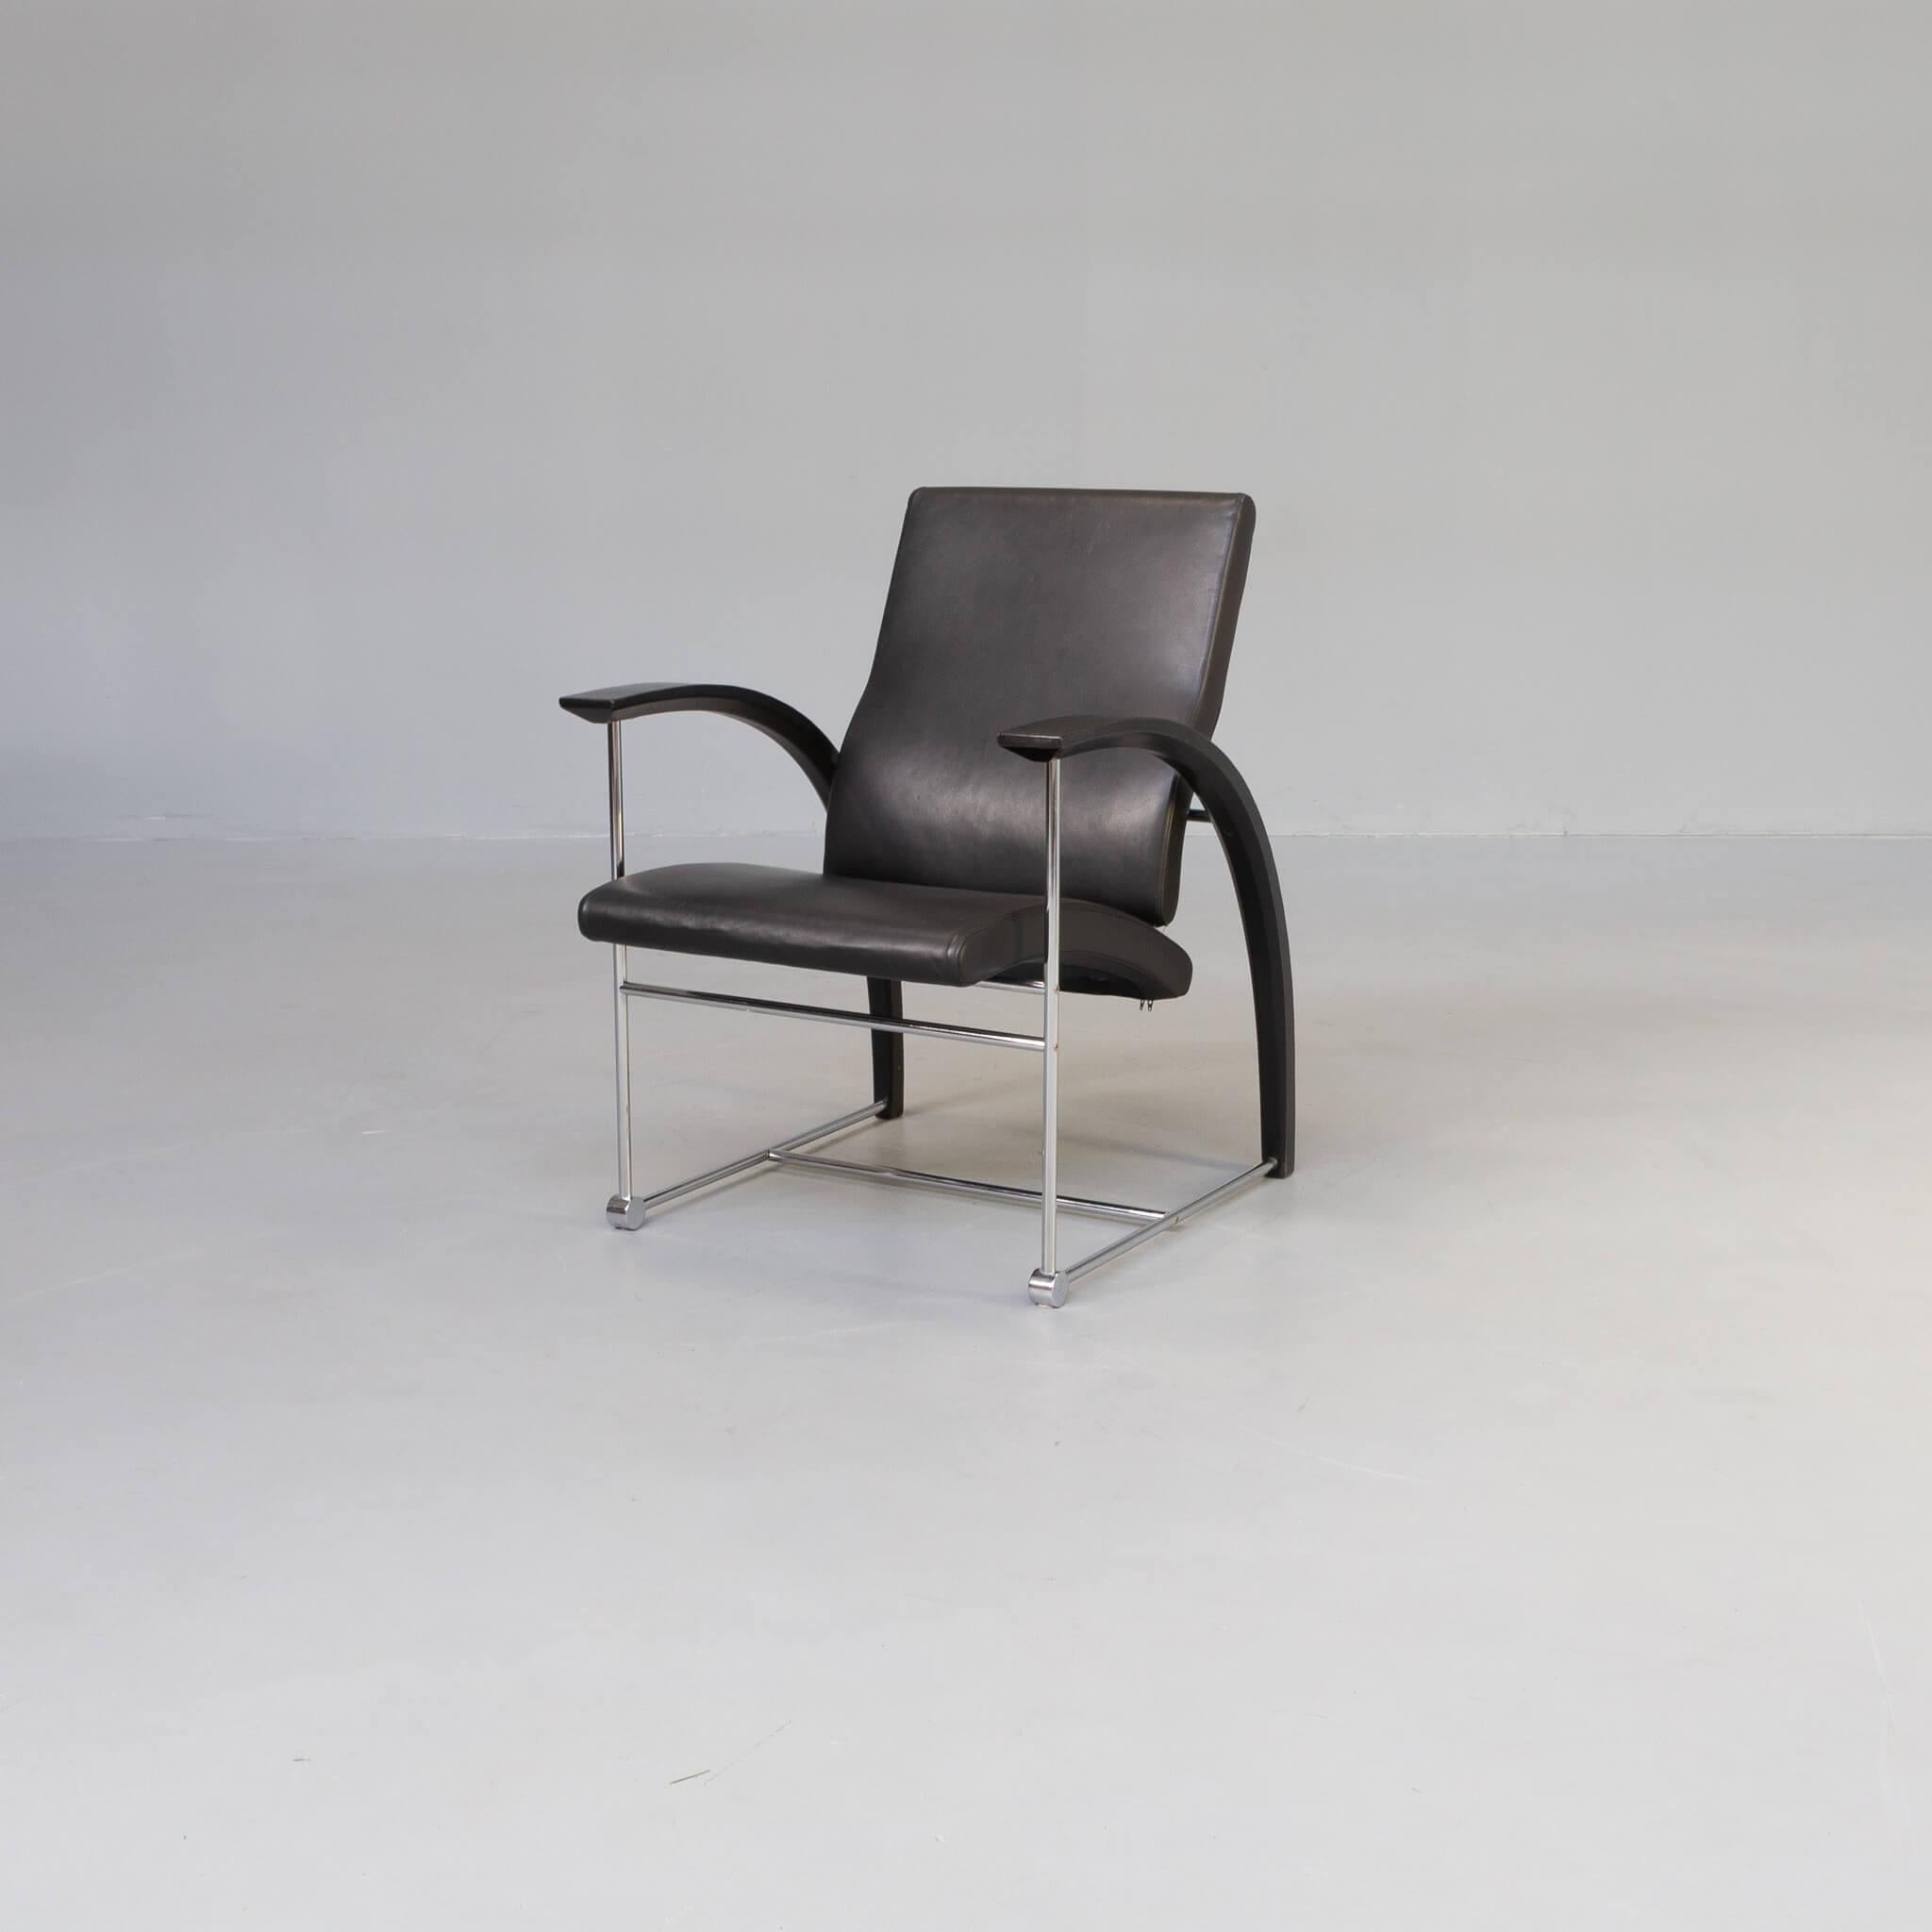 Very beautiful design lounge chair. The chromed frame carries the chair and is well detailed build on. The armrest run all over the frame and the skai seat makes relaxing a party. Good condition consistent with age and use.